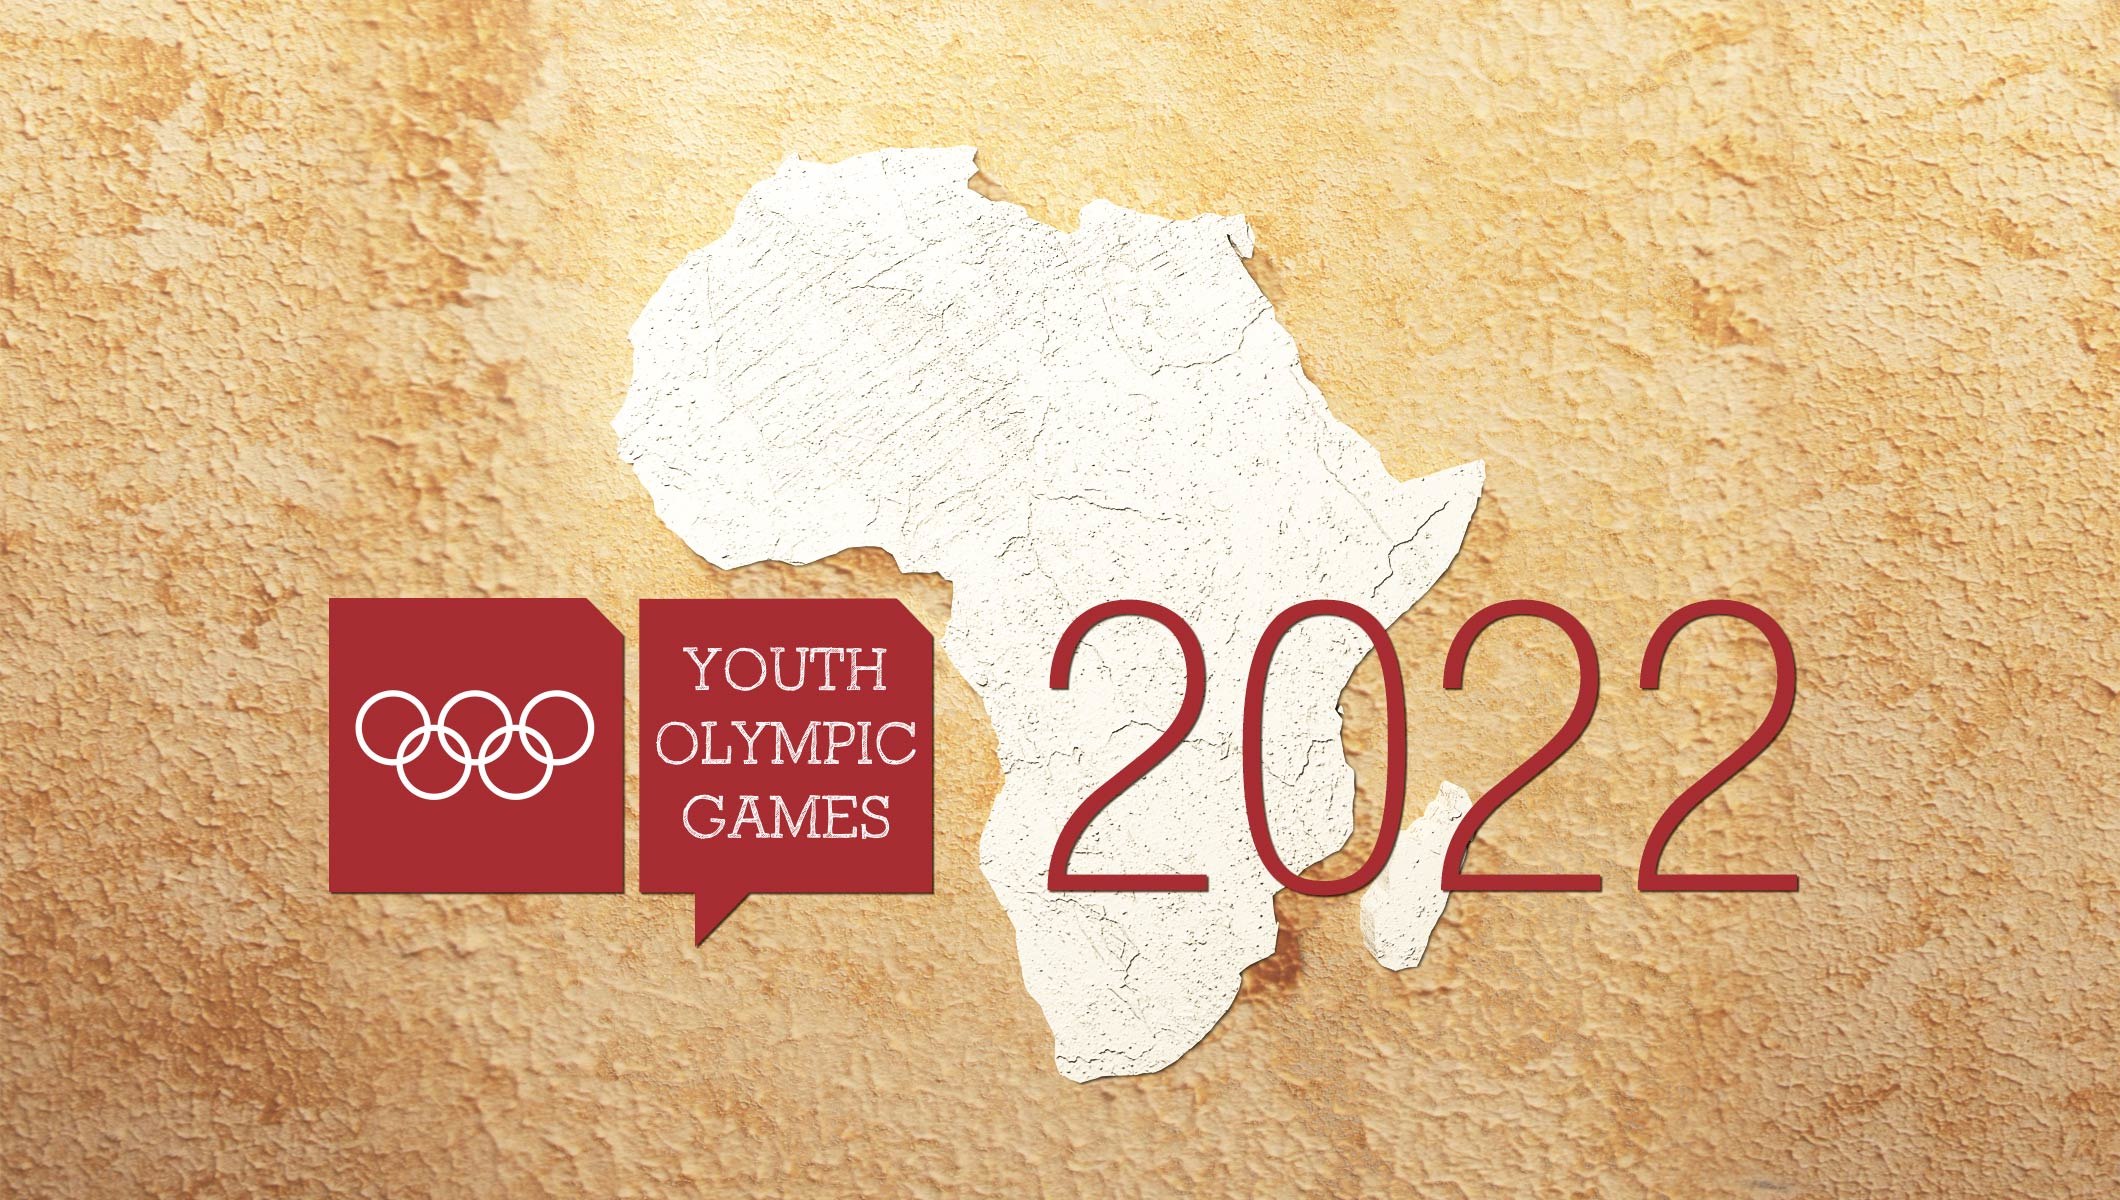 The host for the YOG 2022 will be elected at the IOC Session in October 2018 